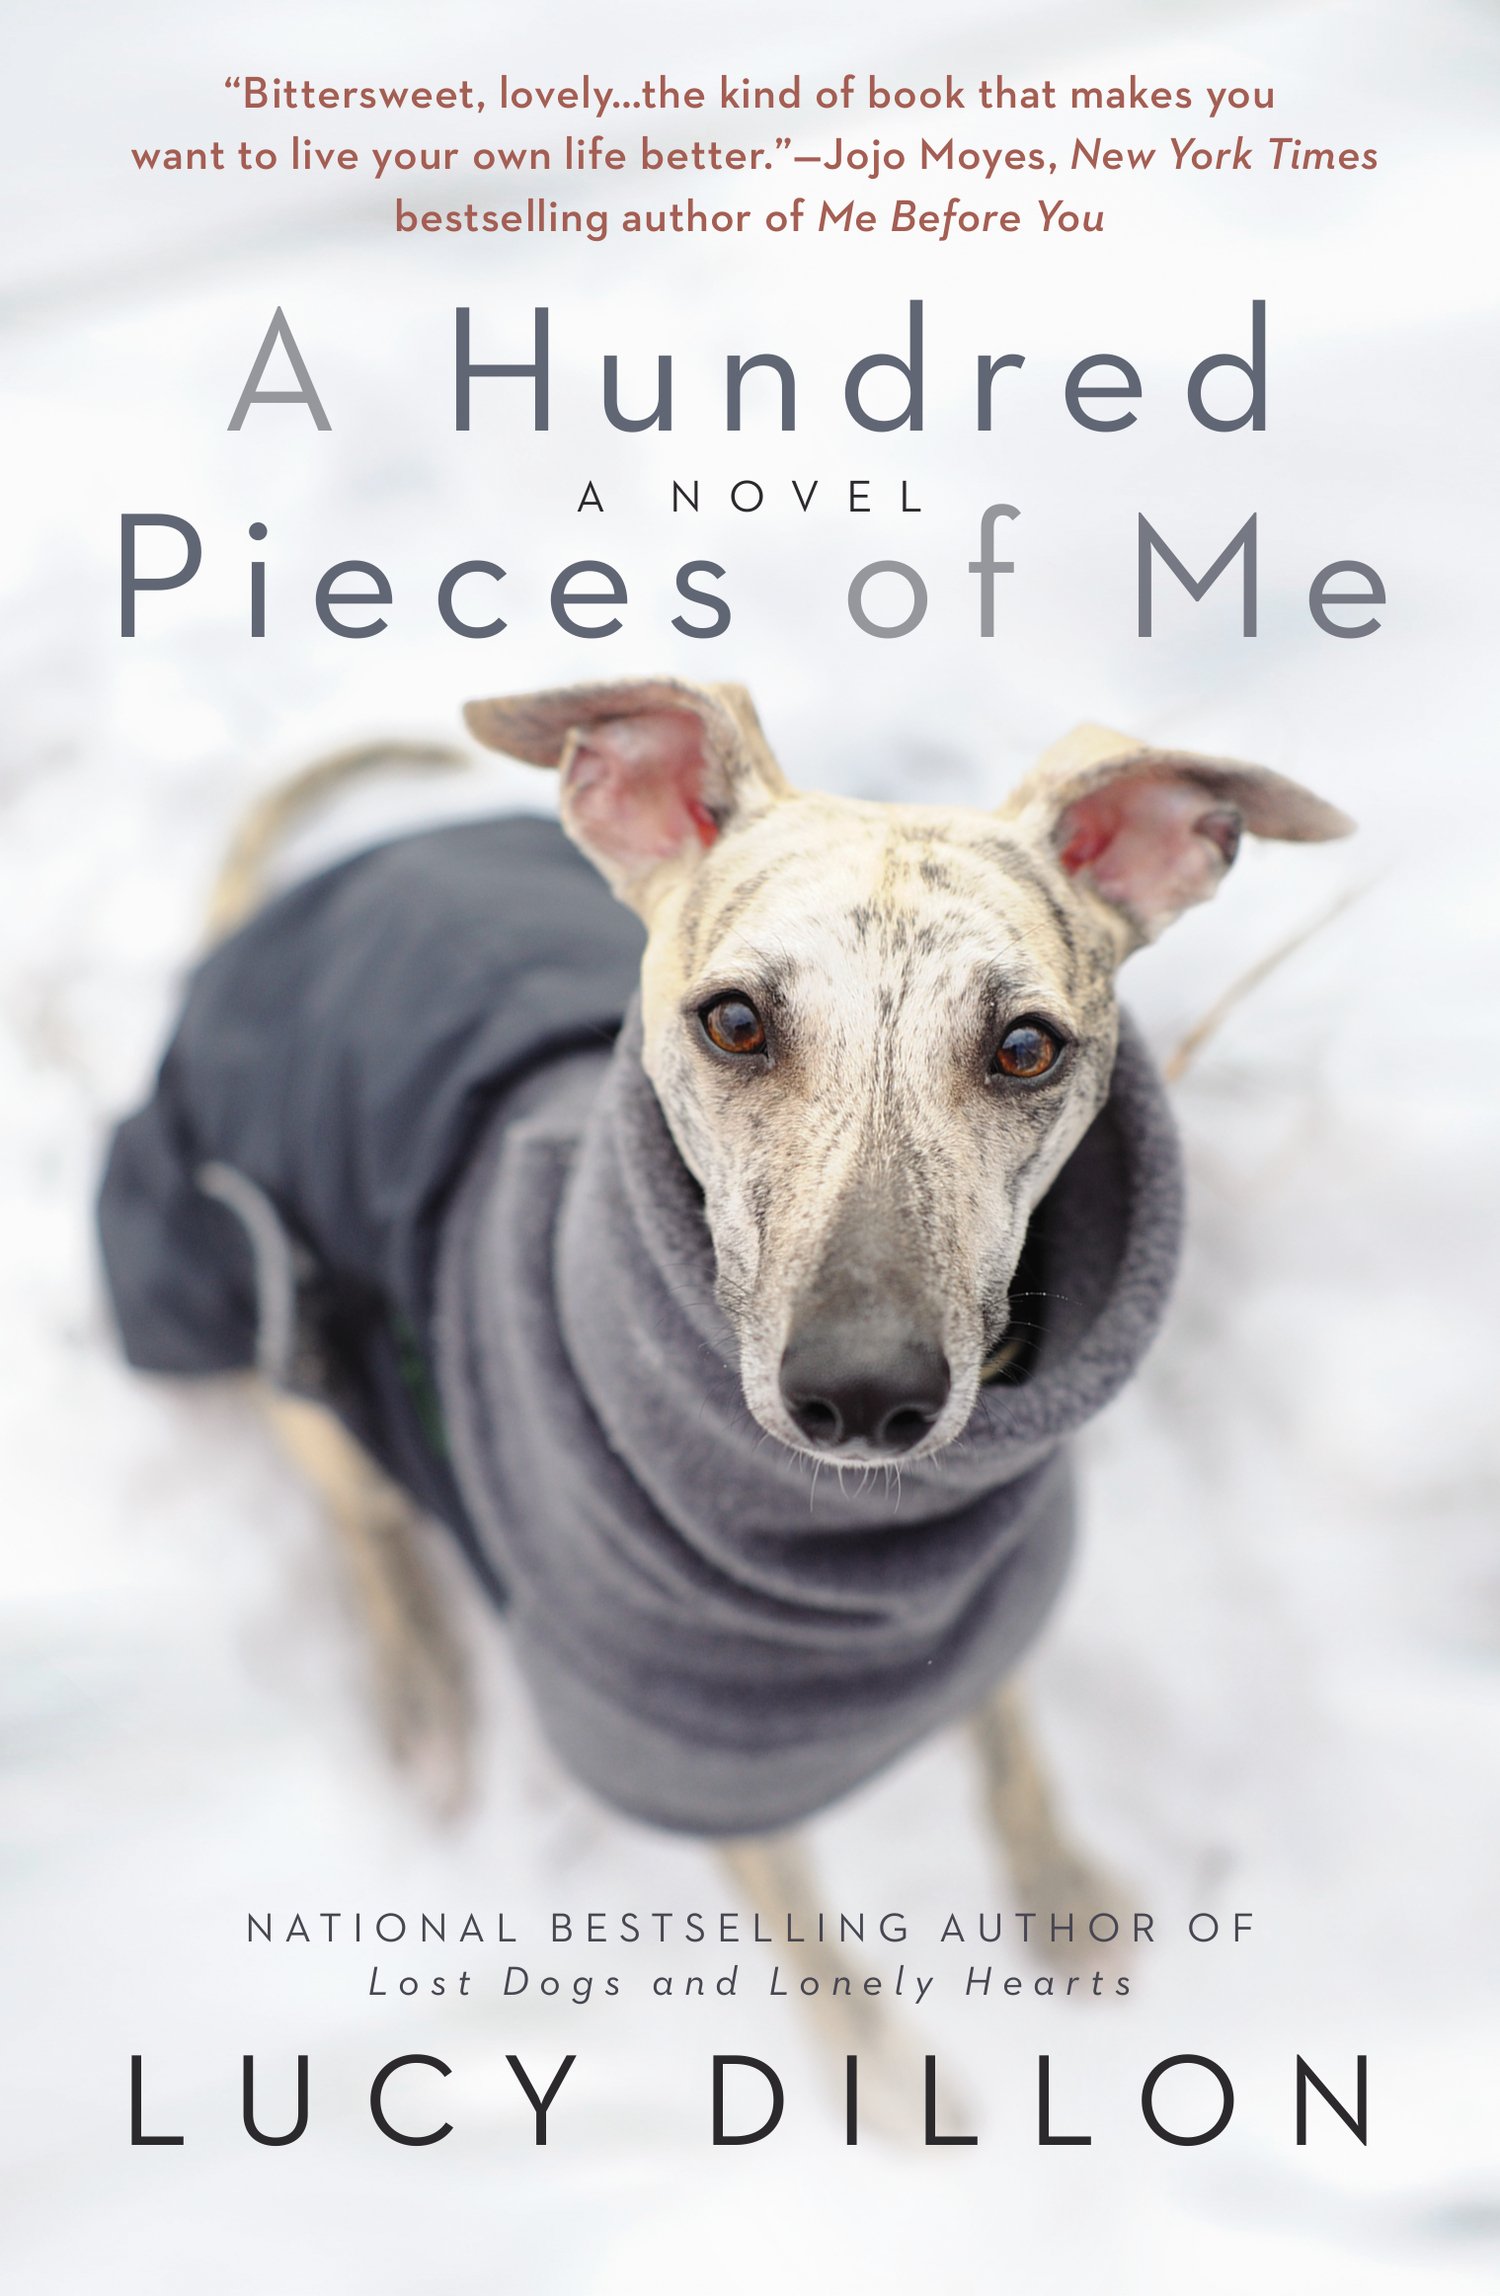 A Hundred Pieces Of Me by Lucy Dillon